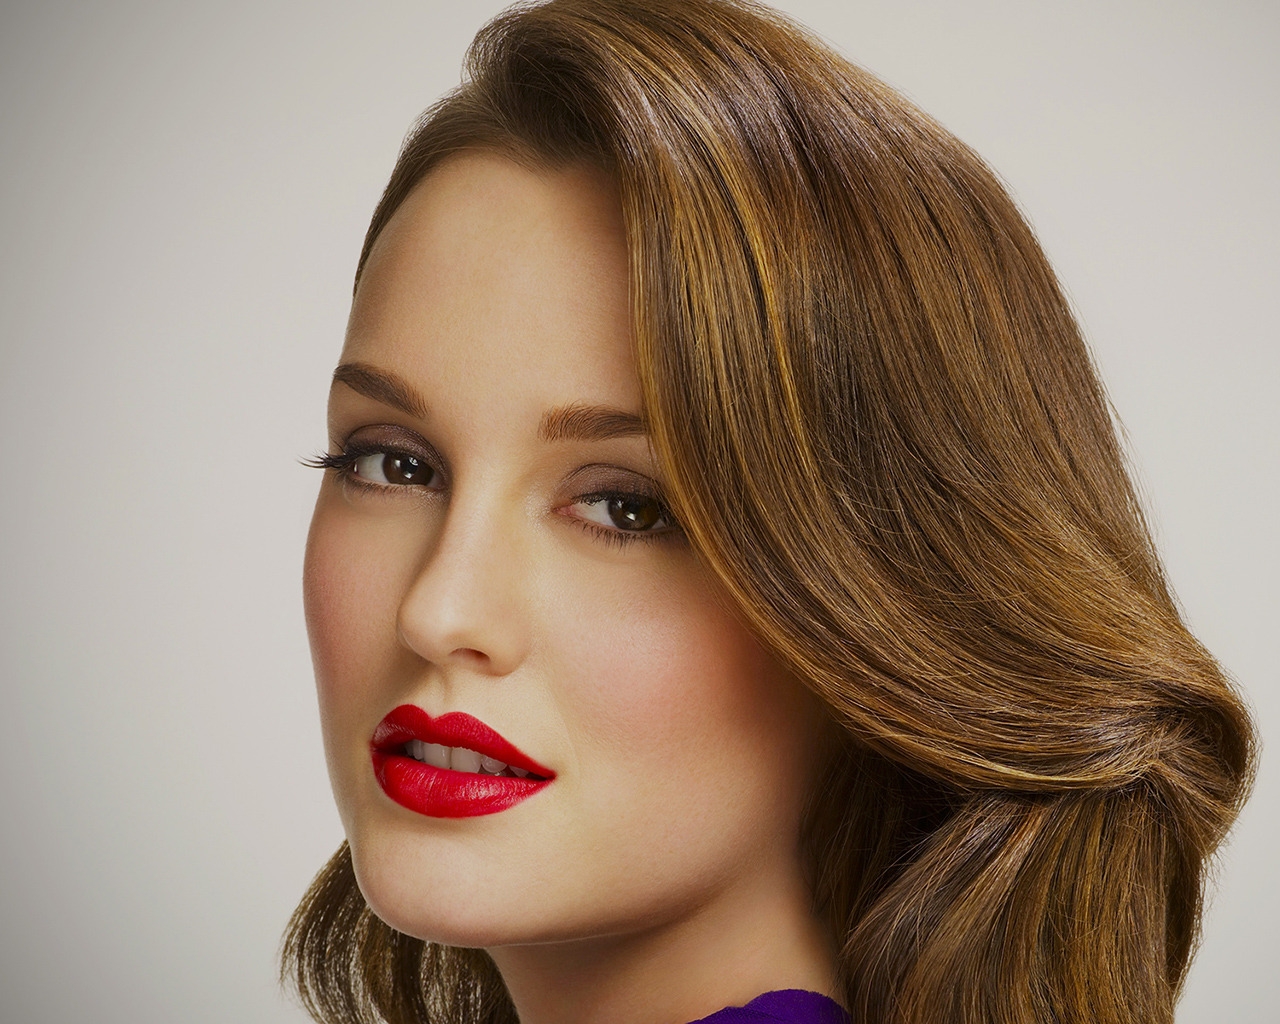 Leighton Meester Gorgeous for 1280 x 1024 resolution